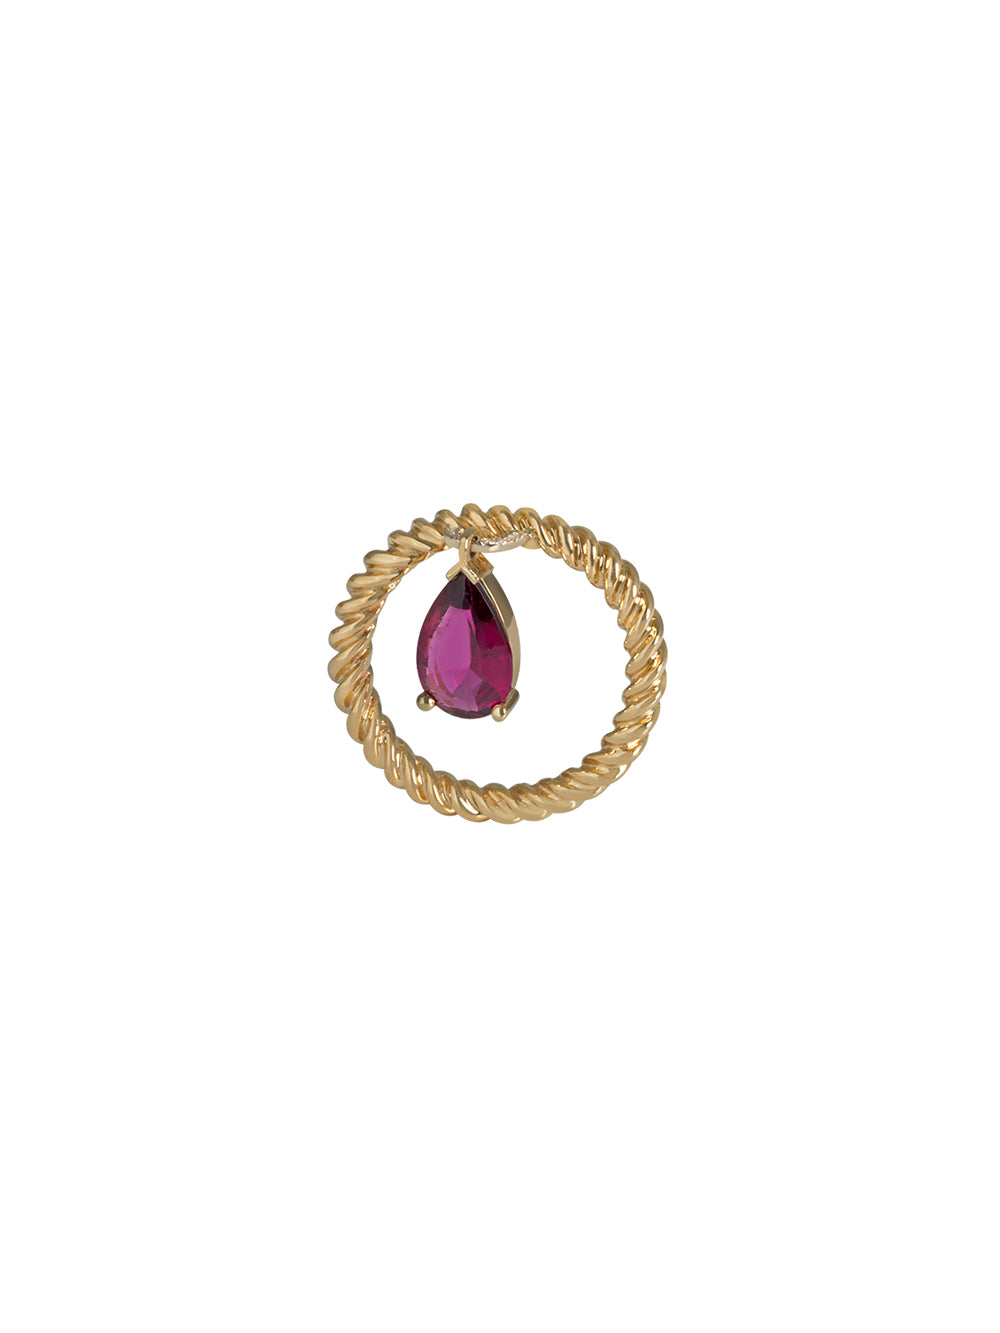 Z'AMOURETTE RED TOURMALINE RING